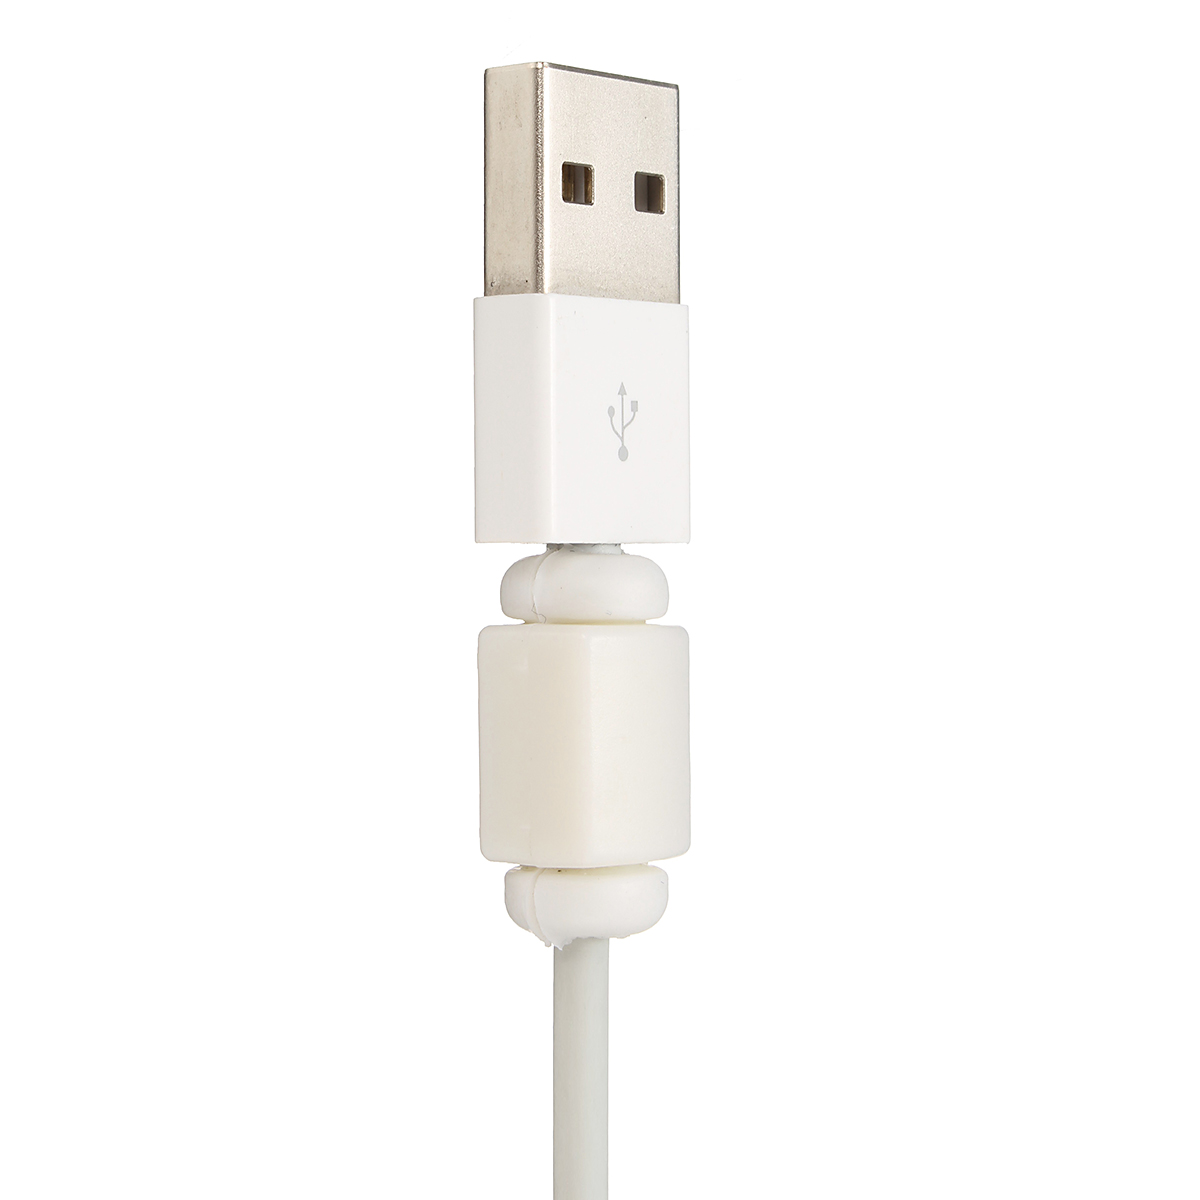 Digital-Cable-Line-Cord-Protecotor-Charger-Saver-For-iPhone-7-Samsung-Xiaomi-1123545